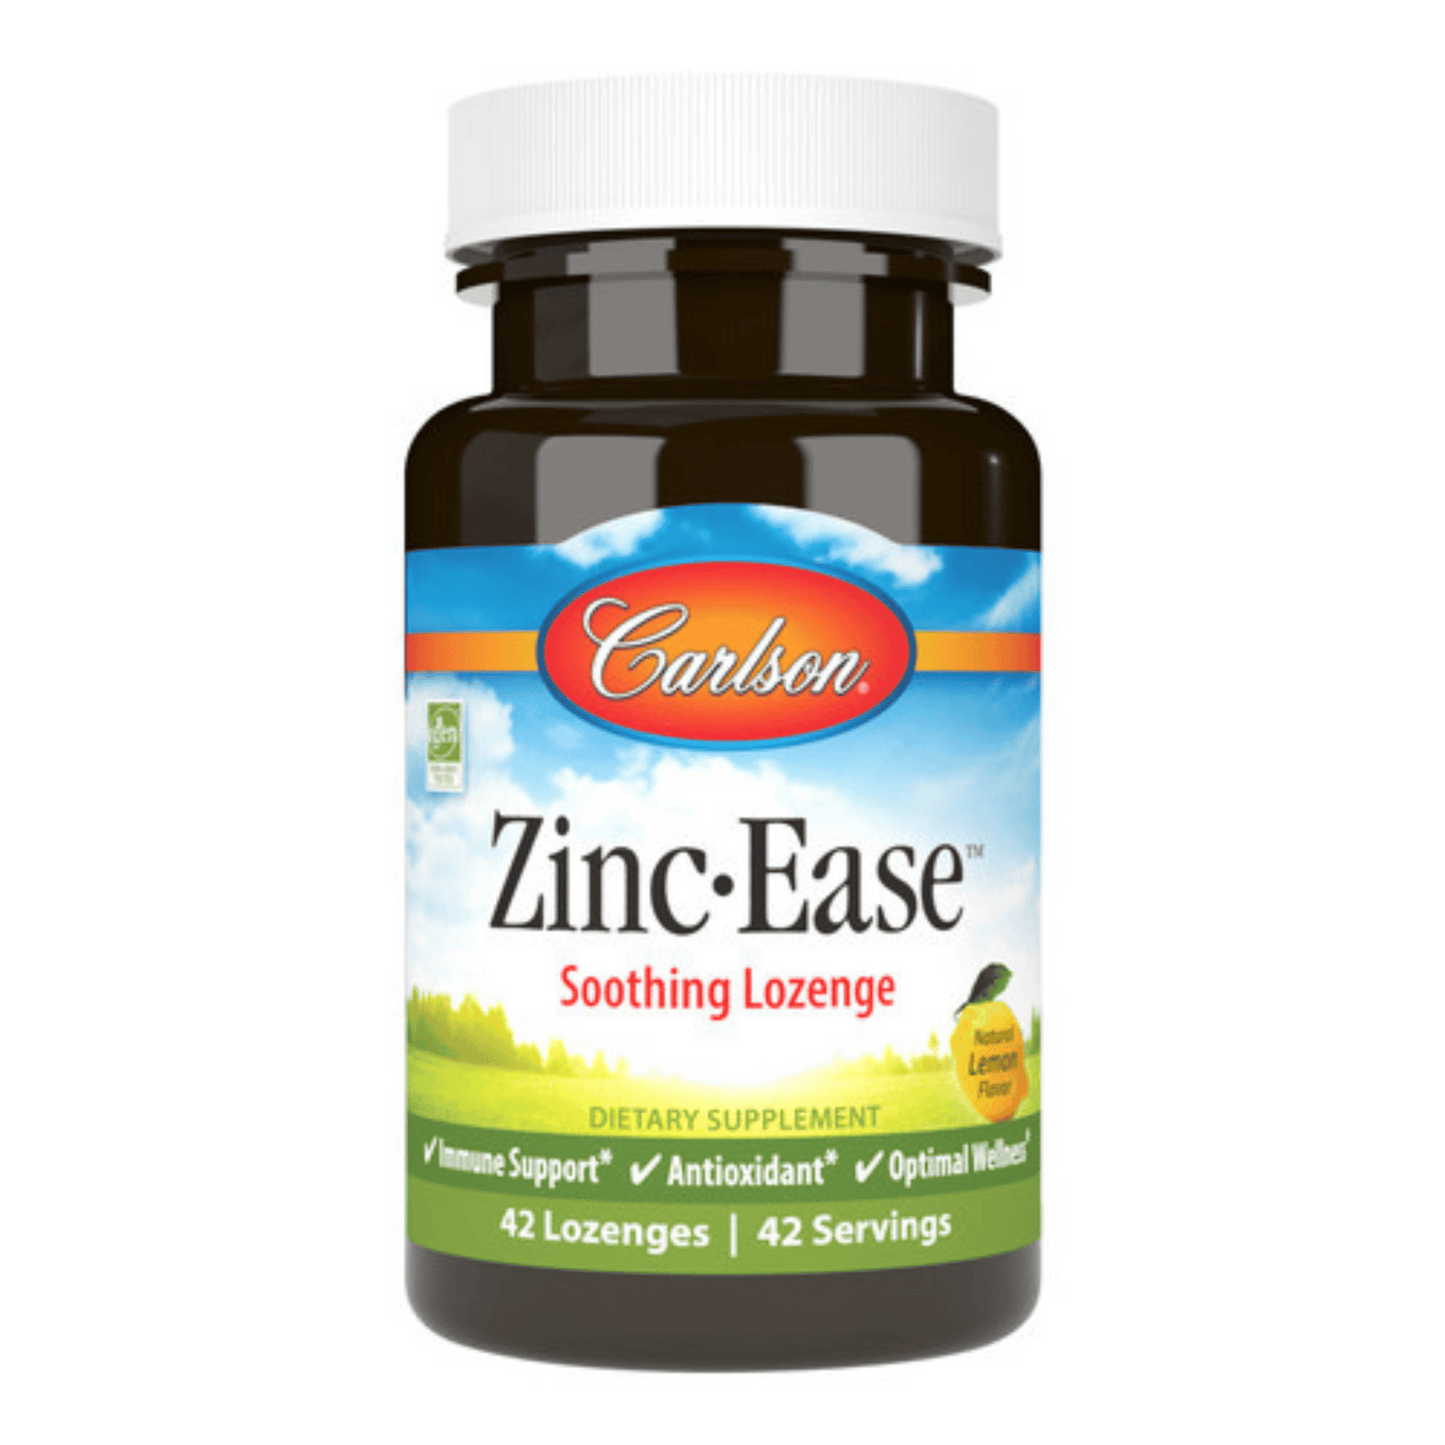 Primary Image of Zinc Ease (42 count)